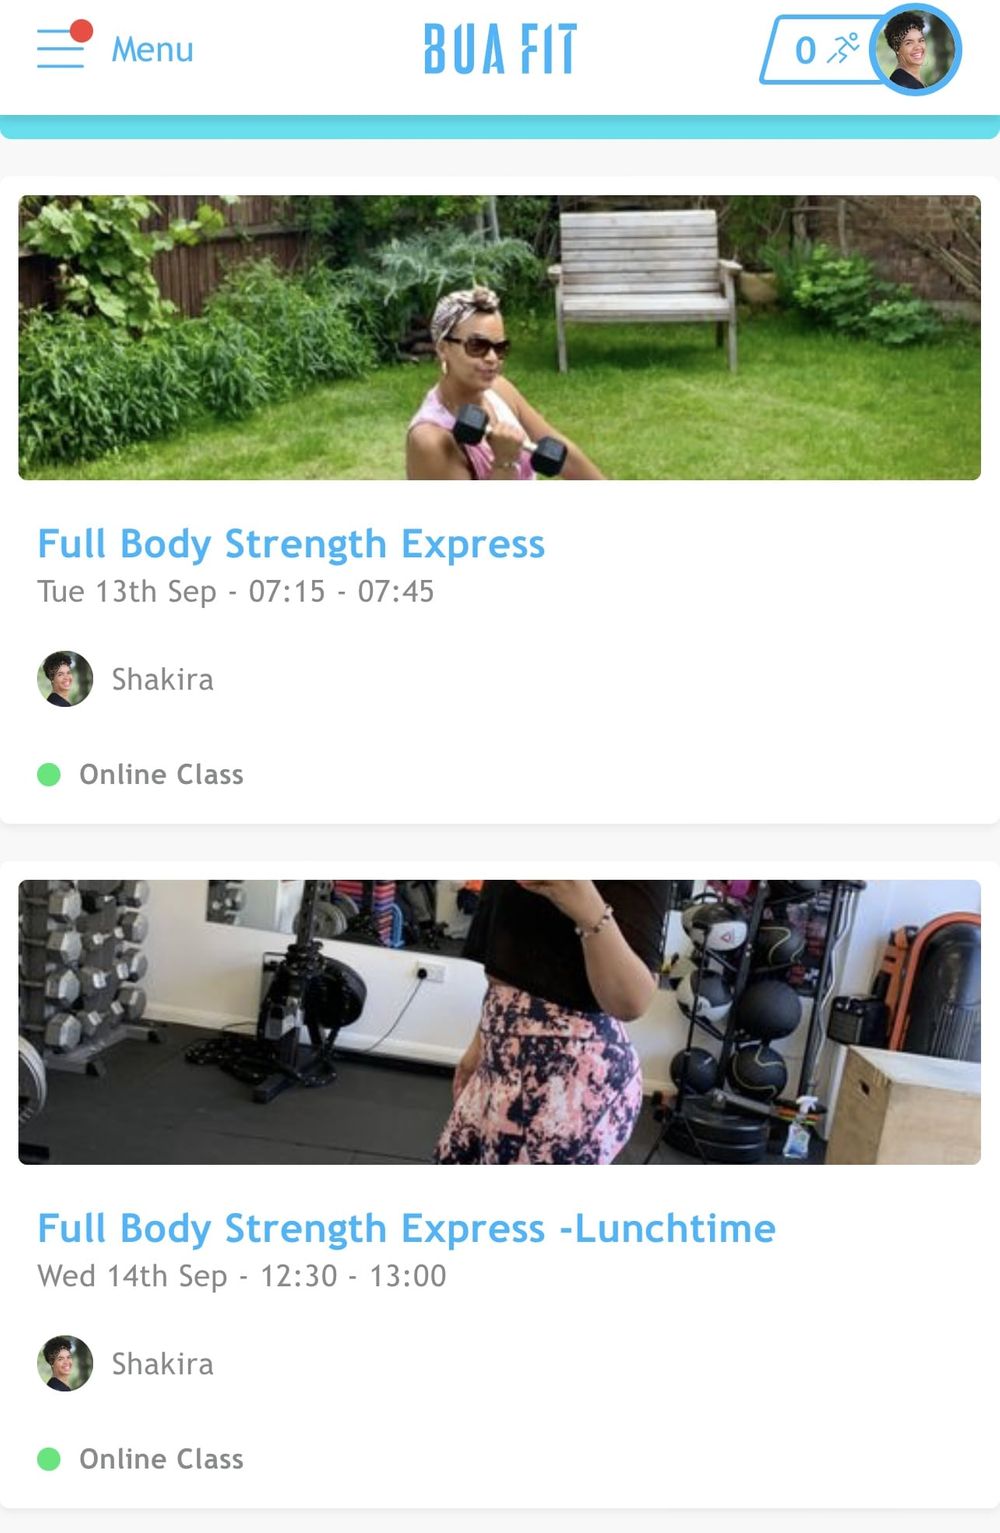 Happy Thursday Bua Fit community 😊

So excited to share I’m back teaching online, all kicking off next week with full body strength workouts for those short on time.

Giving you maximum results in minimum time 💪🏾